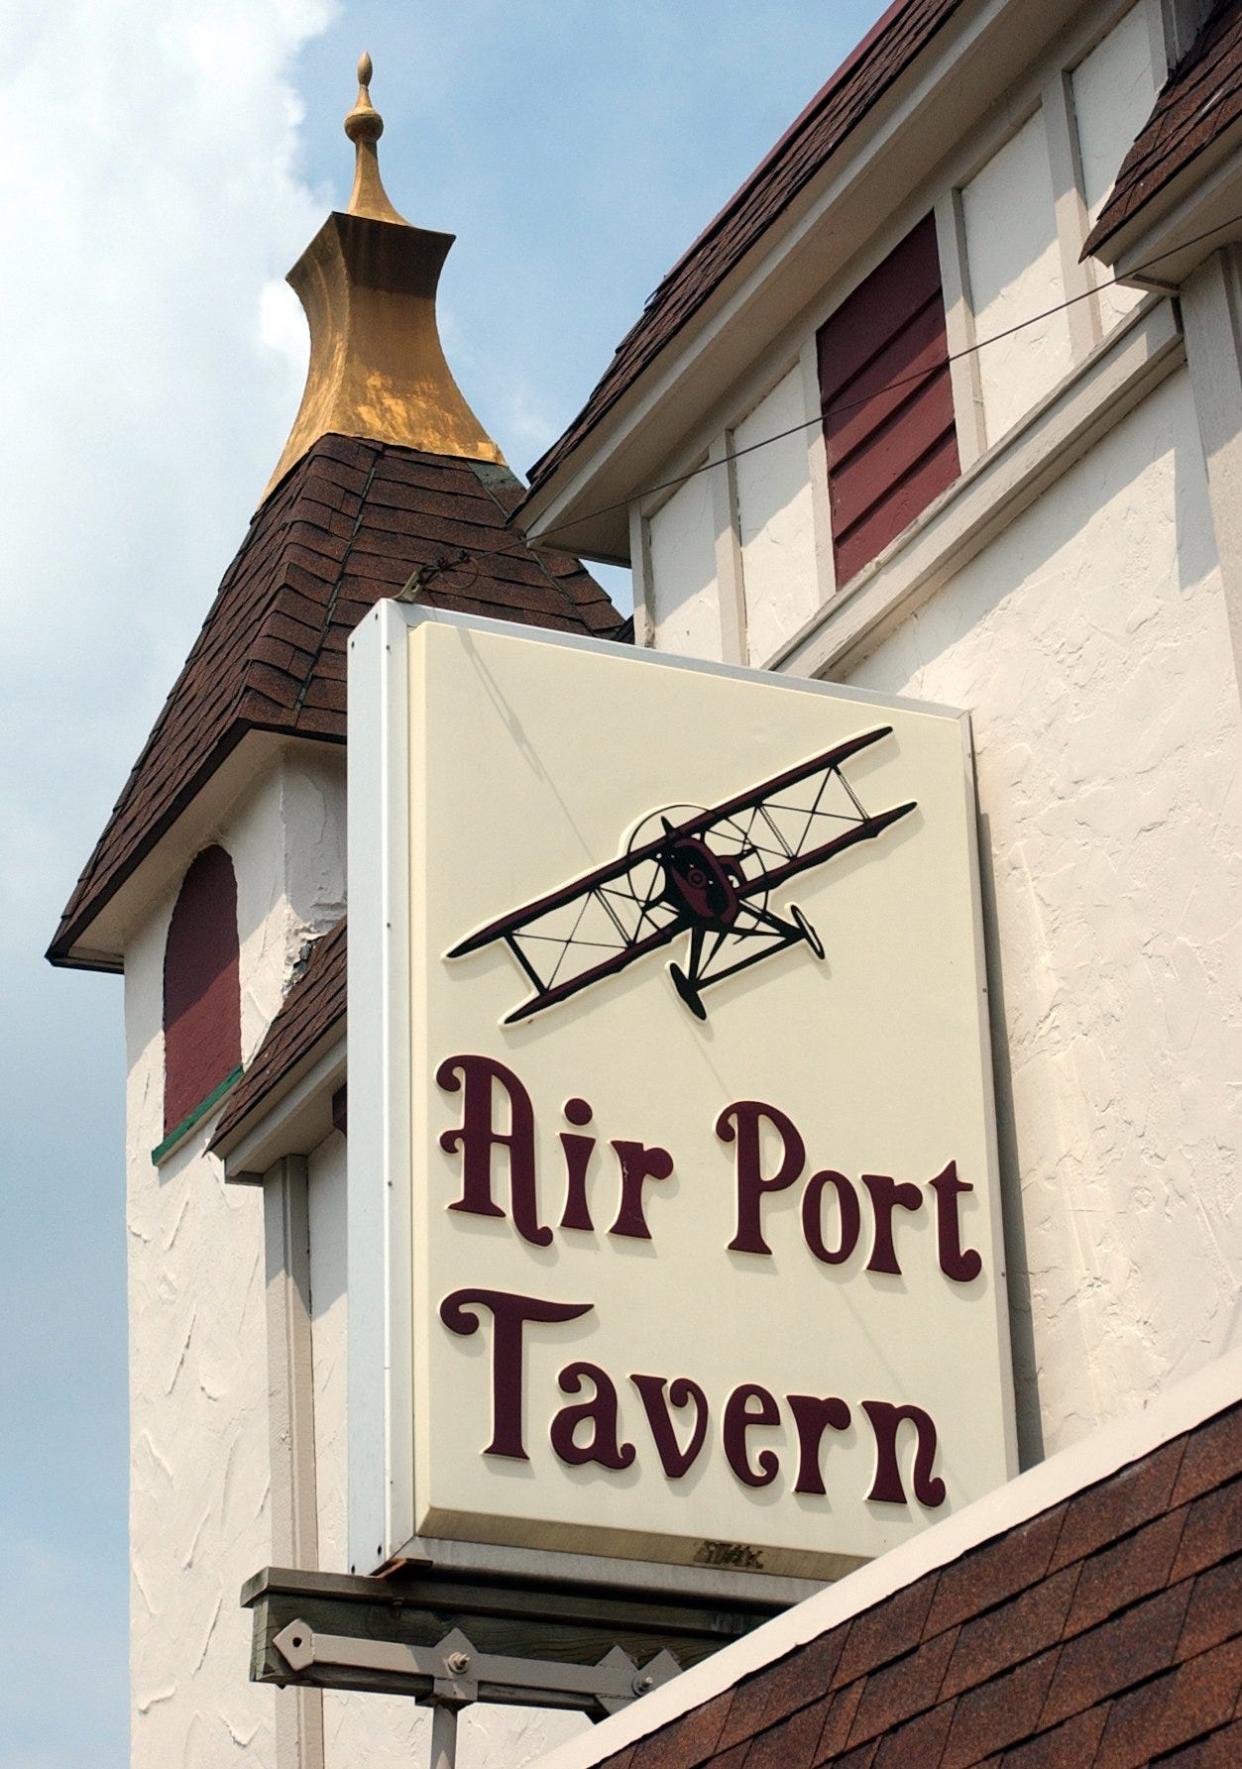 The future of the Airport Tavern at 5000 N. Grand River in Lansing is uncertain after the eatery closed.